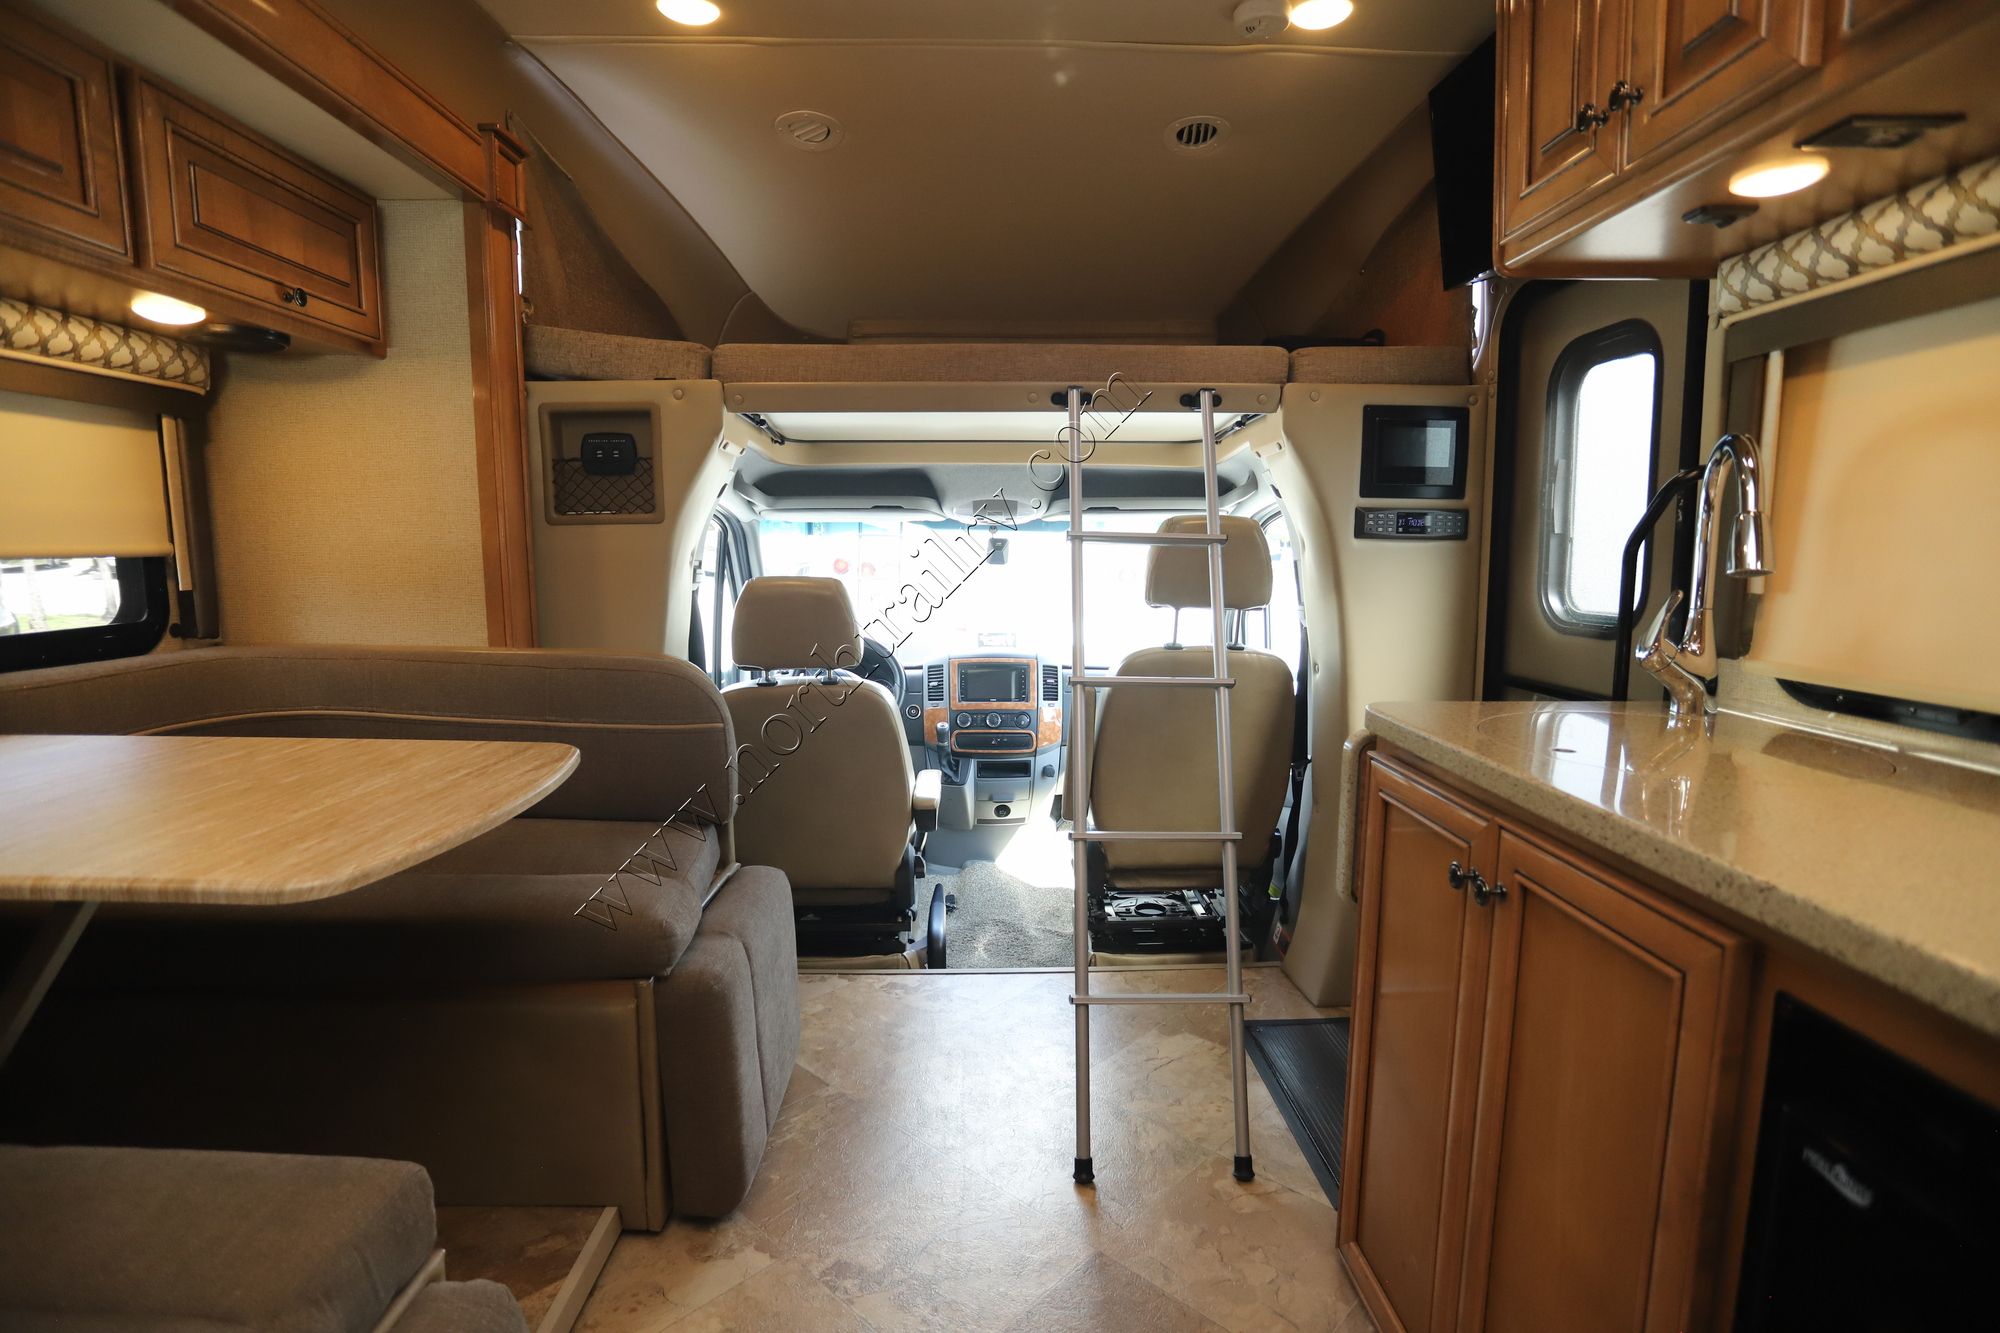 Used 2018 Thor Citation 24SS Class C  For Sale